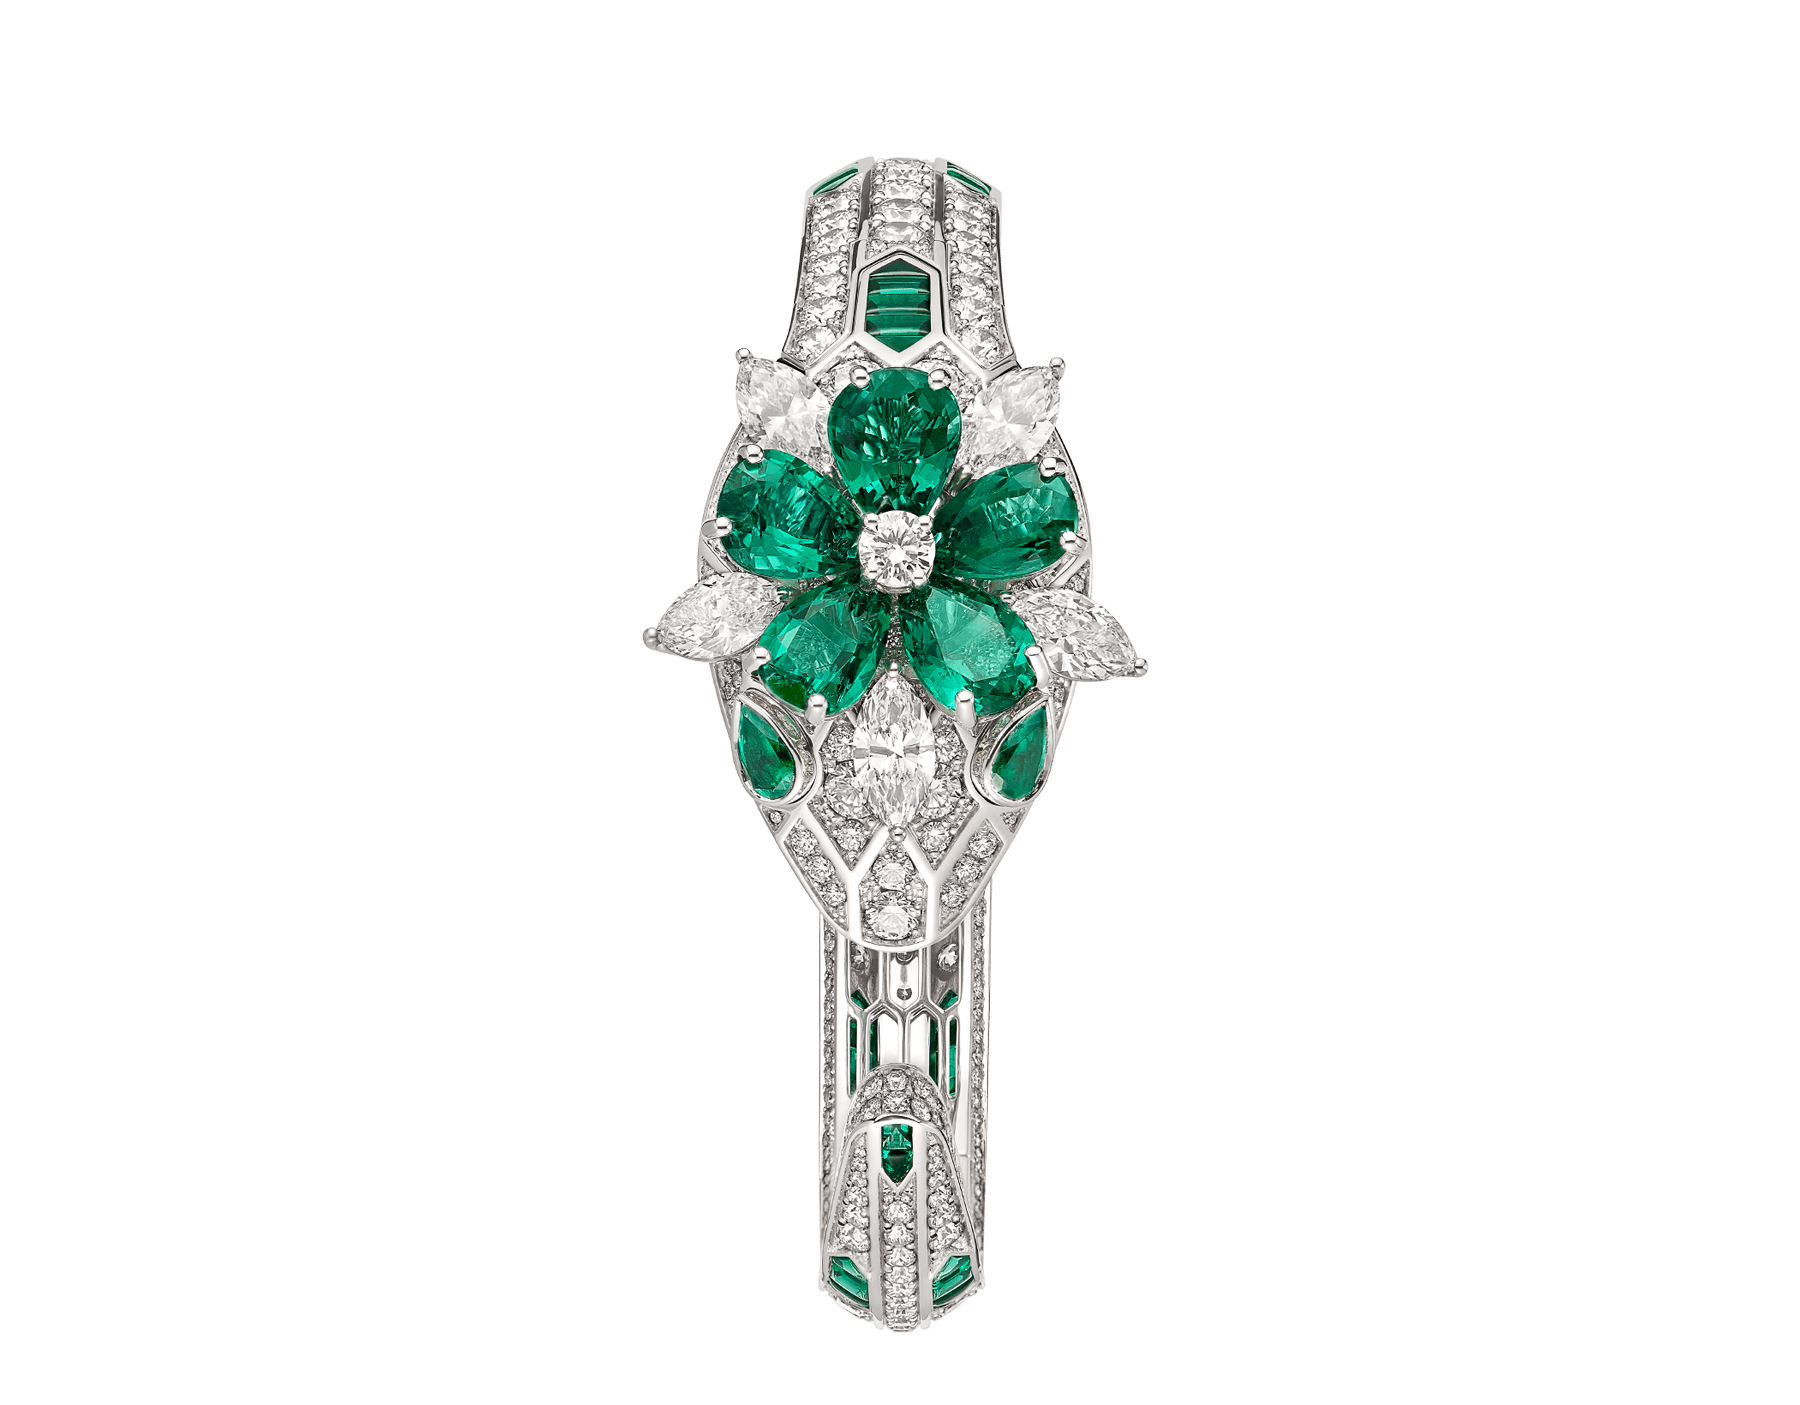 Serpenti Misteriosi Secret Watch with 18 kt white gold head set with brilliant-cut and marquise-shaped diamonds and pear-shaped emeralds and emerald eyes, 18 kt white gold case and dial both set with brilliant-cut diamonds, and 18 kt white gold bracelet set with brilliant-cut diamonds and buff-top cut emeralds 103037 image 1